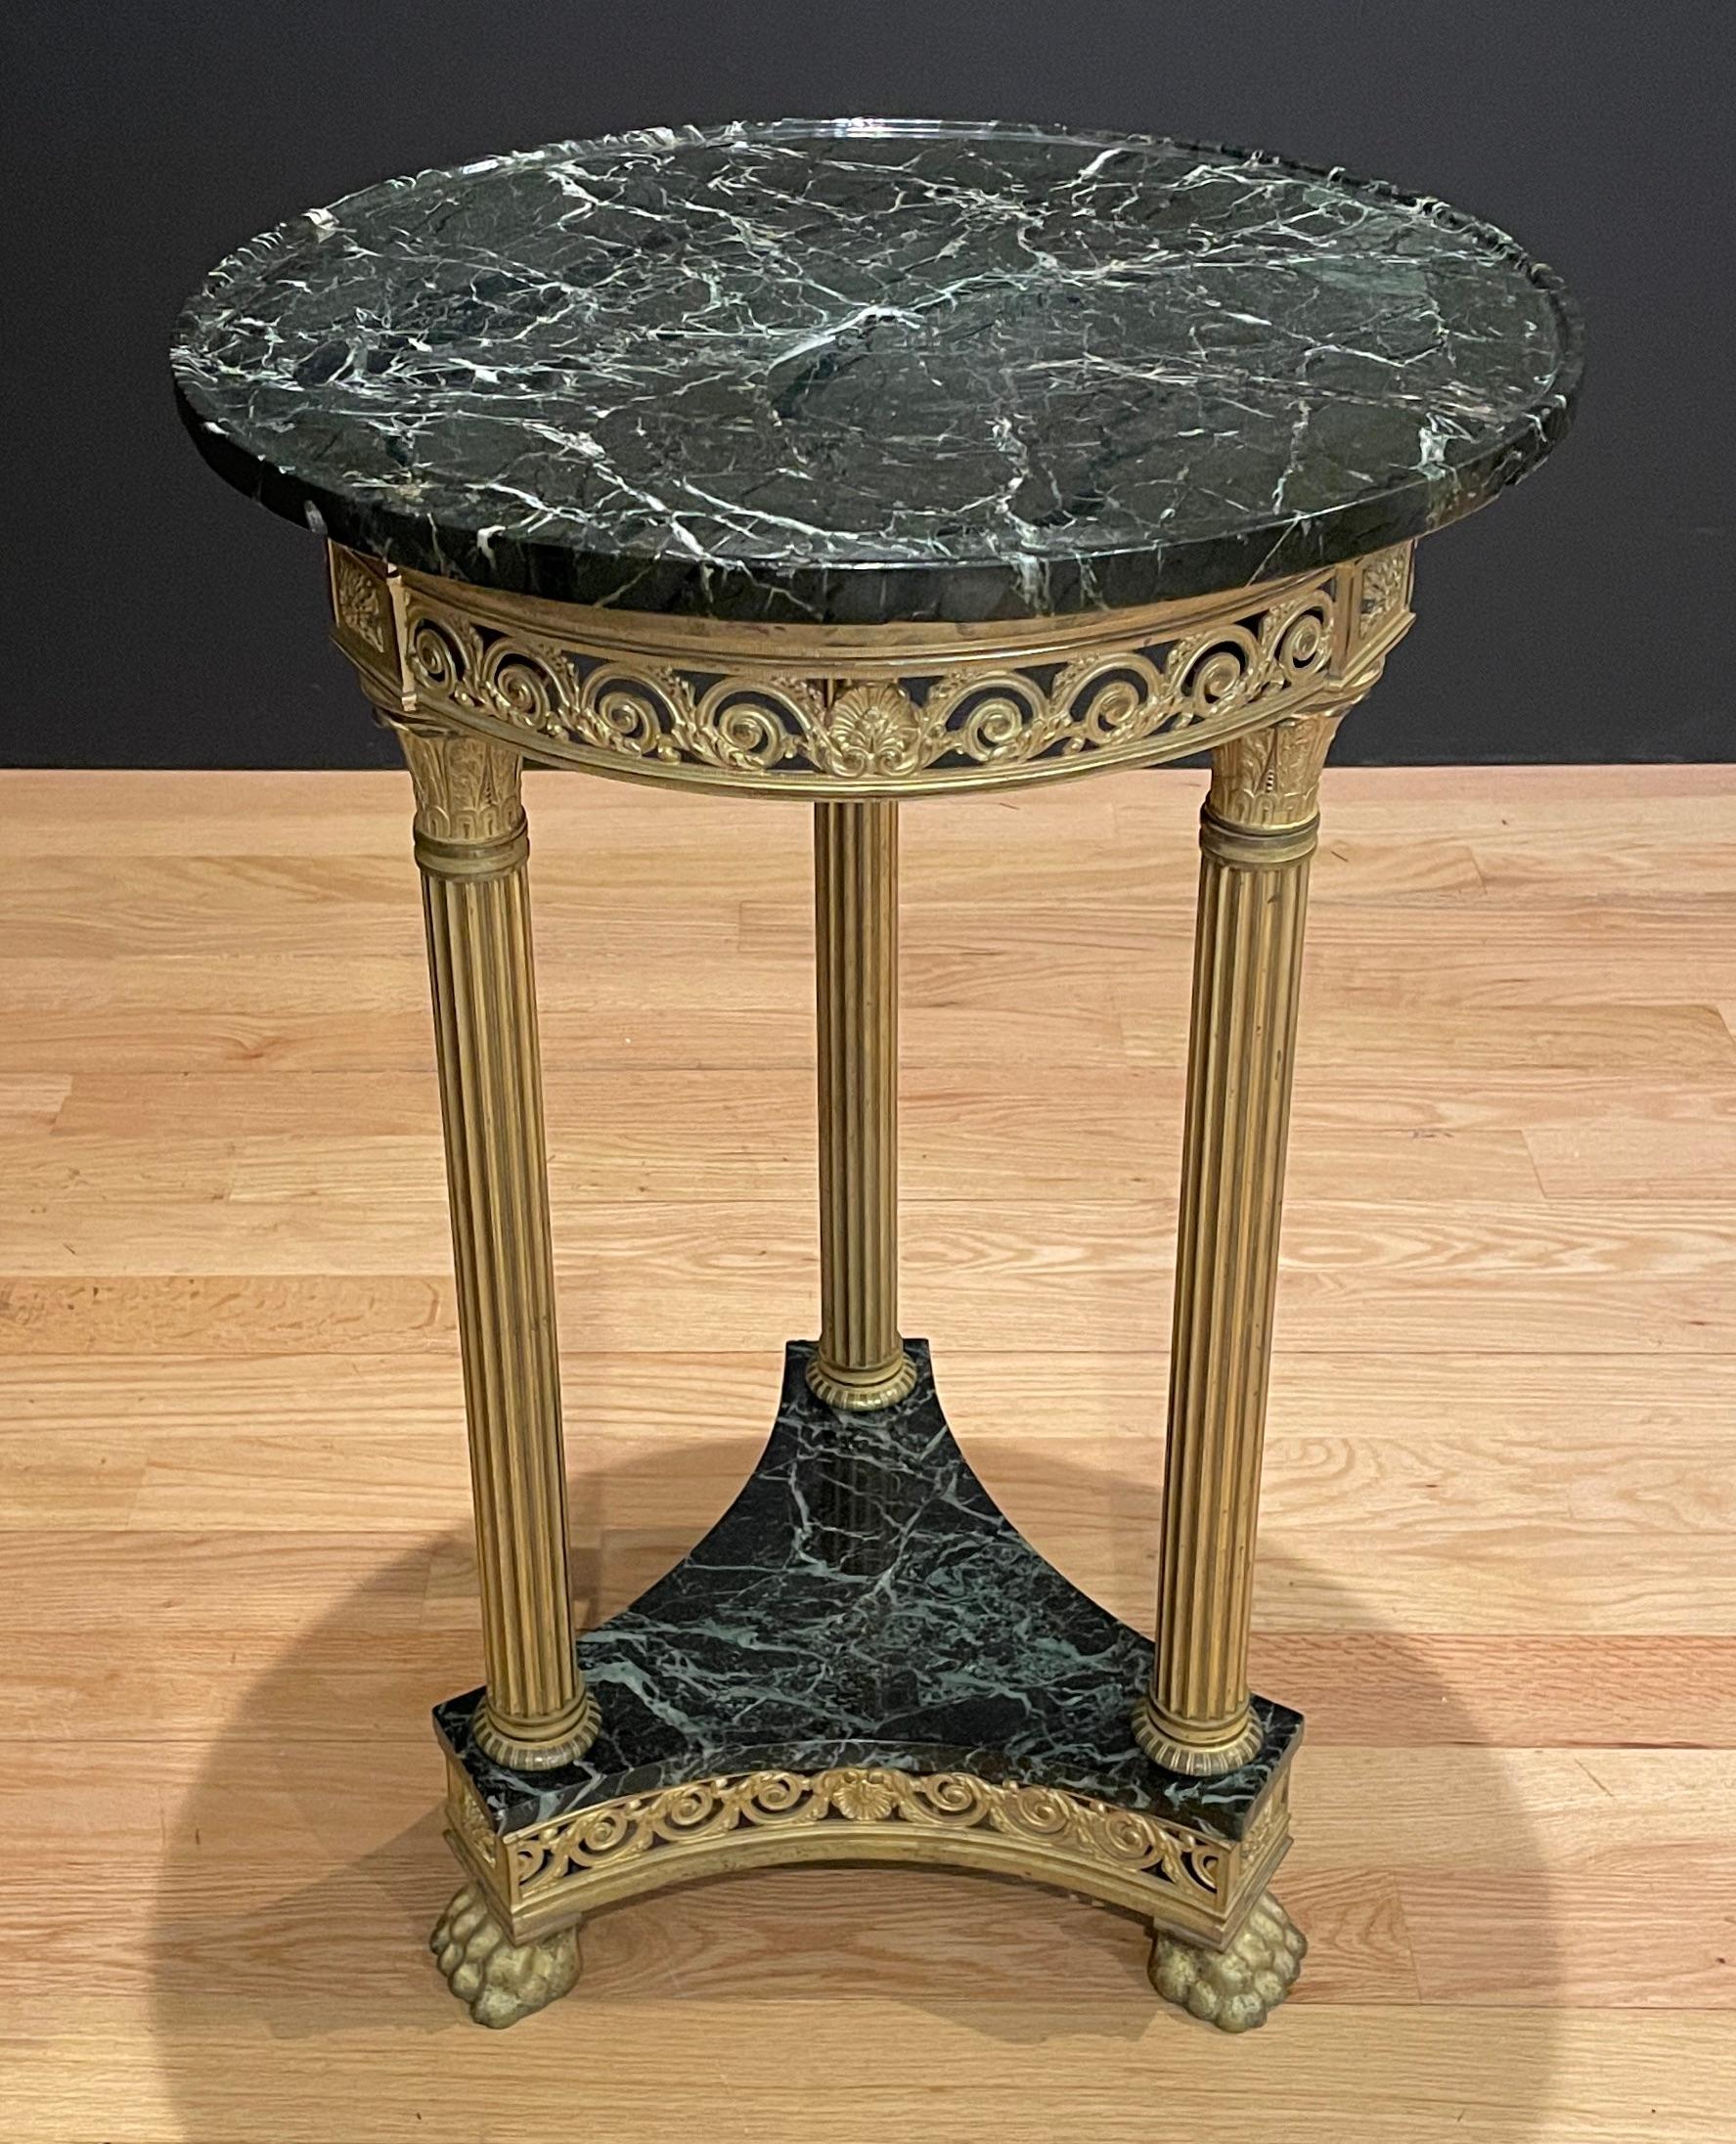 Fine quality 19th century Verde Antico marble top bronze gueridon side table having an Empire, Neoclassical feel. Marble top with a unique inverted carved 